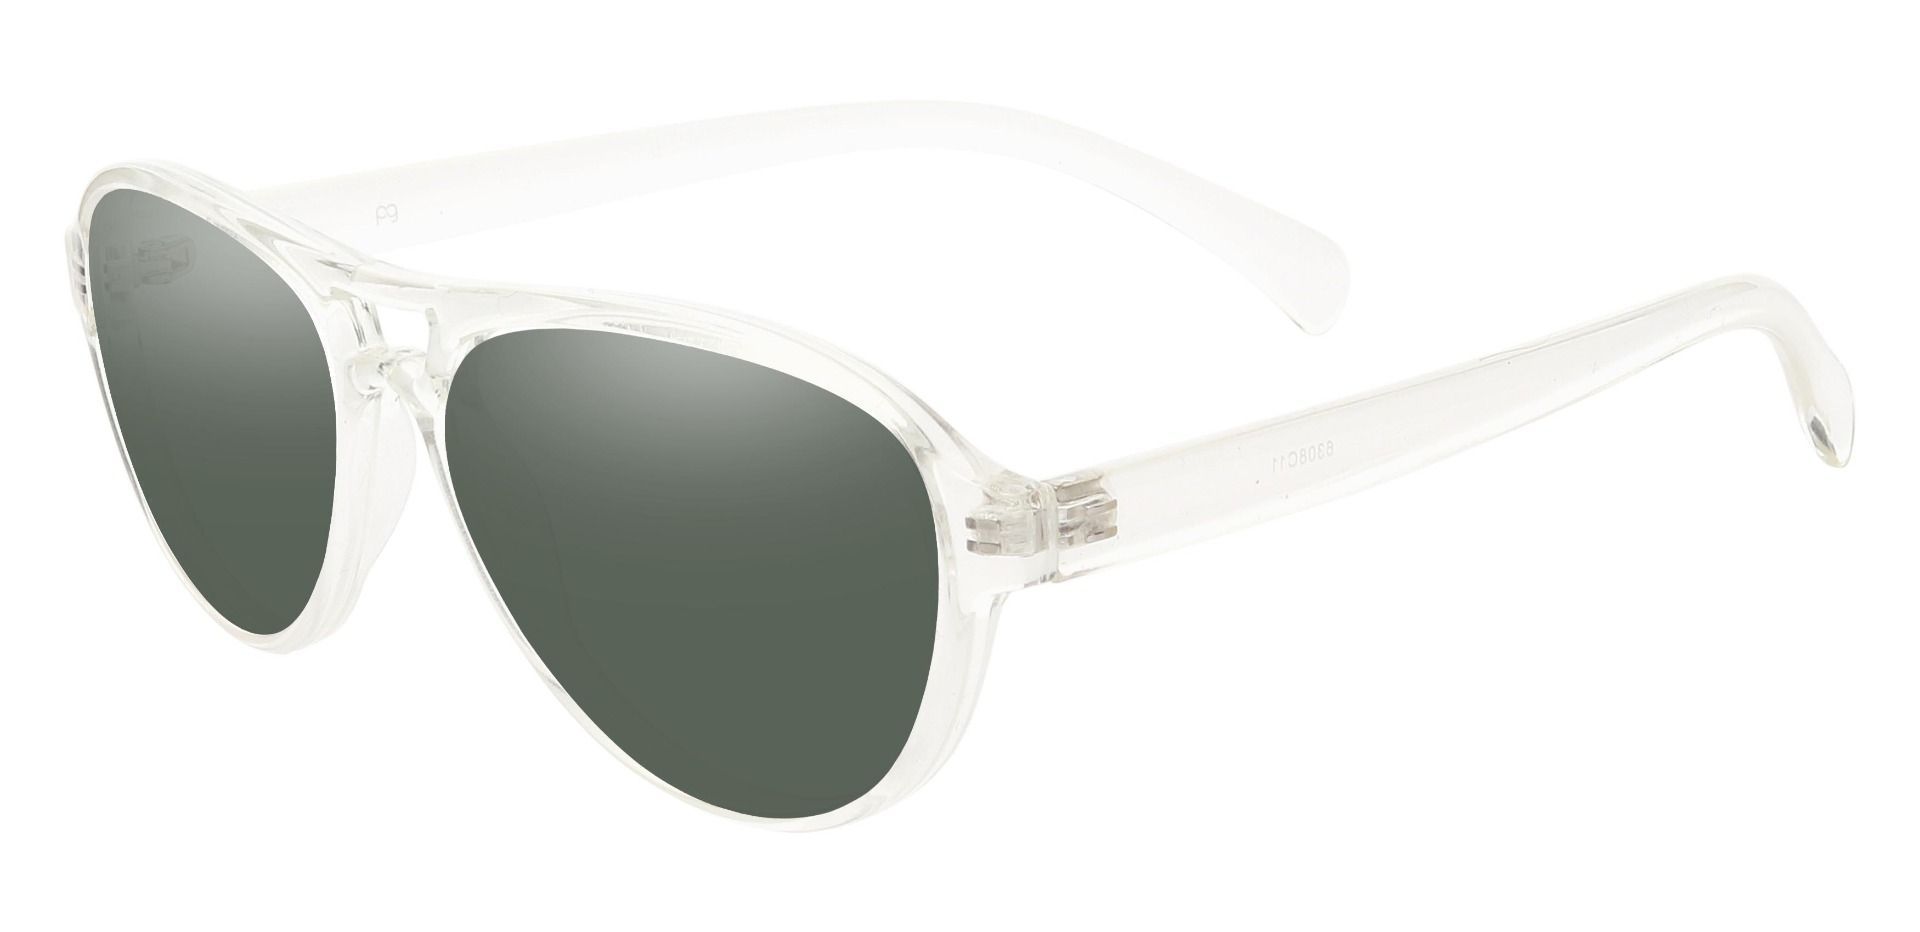 Cinema Aviator Reading Sunglasses - Clear Frame With Green Lenses